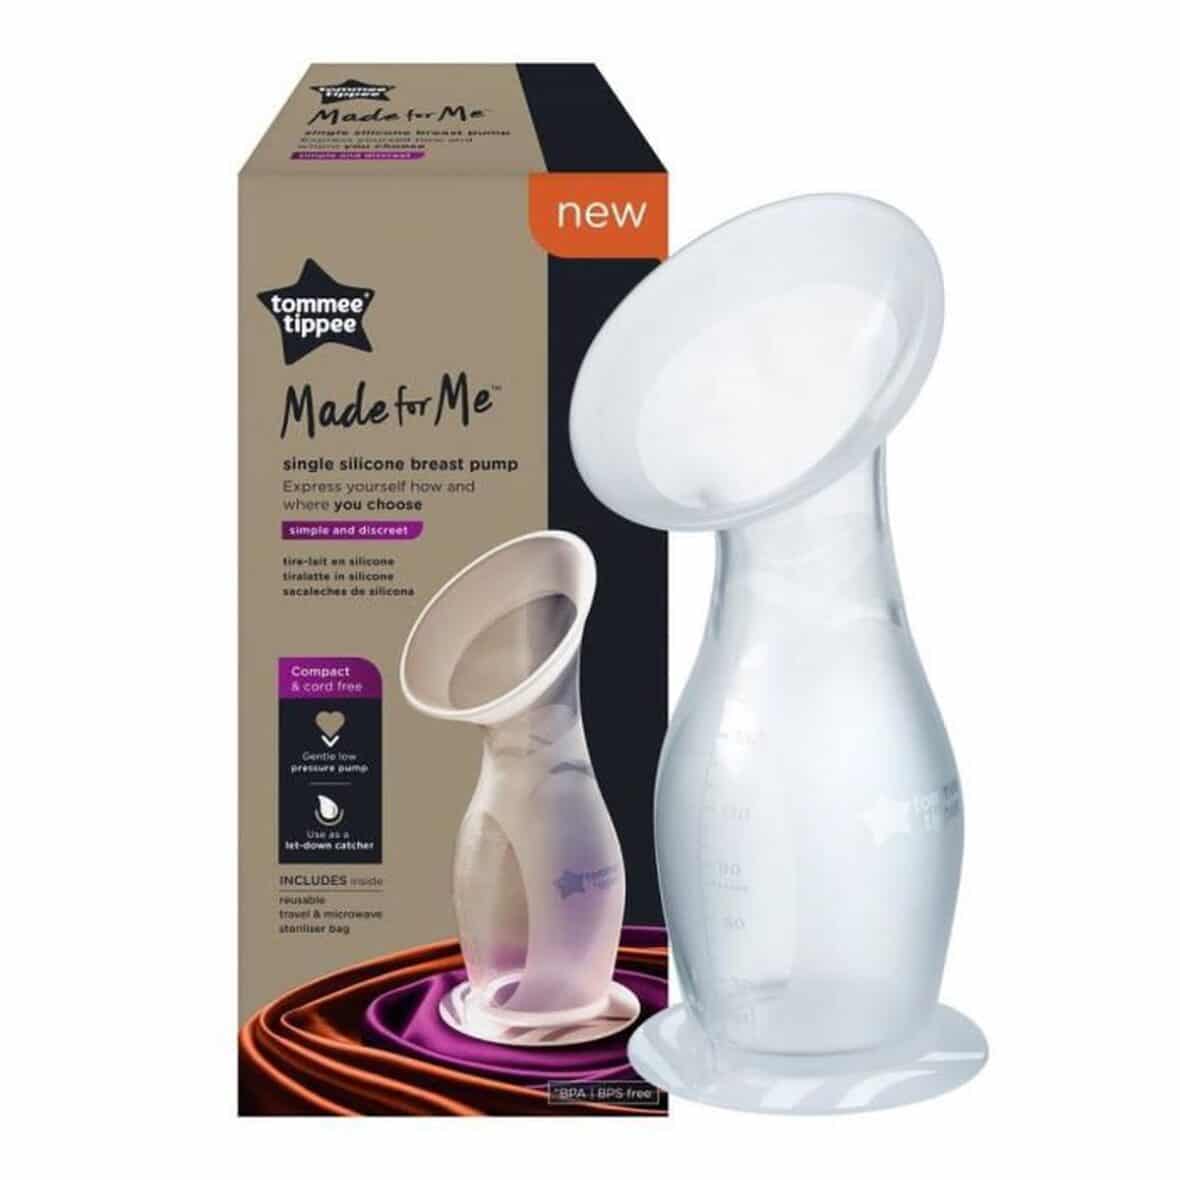 Tommee Tippee Tire-lait manuel nomade en silicone Made for Me